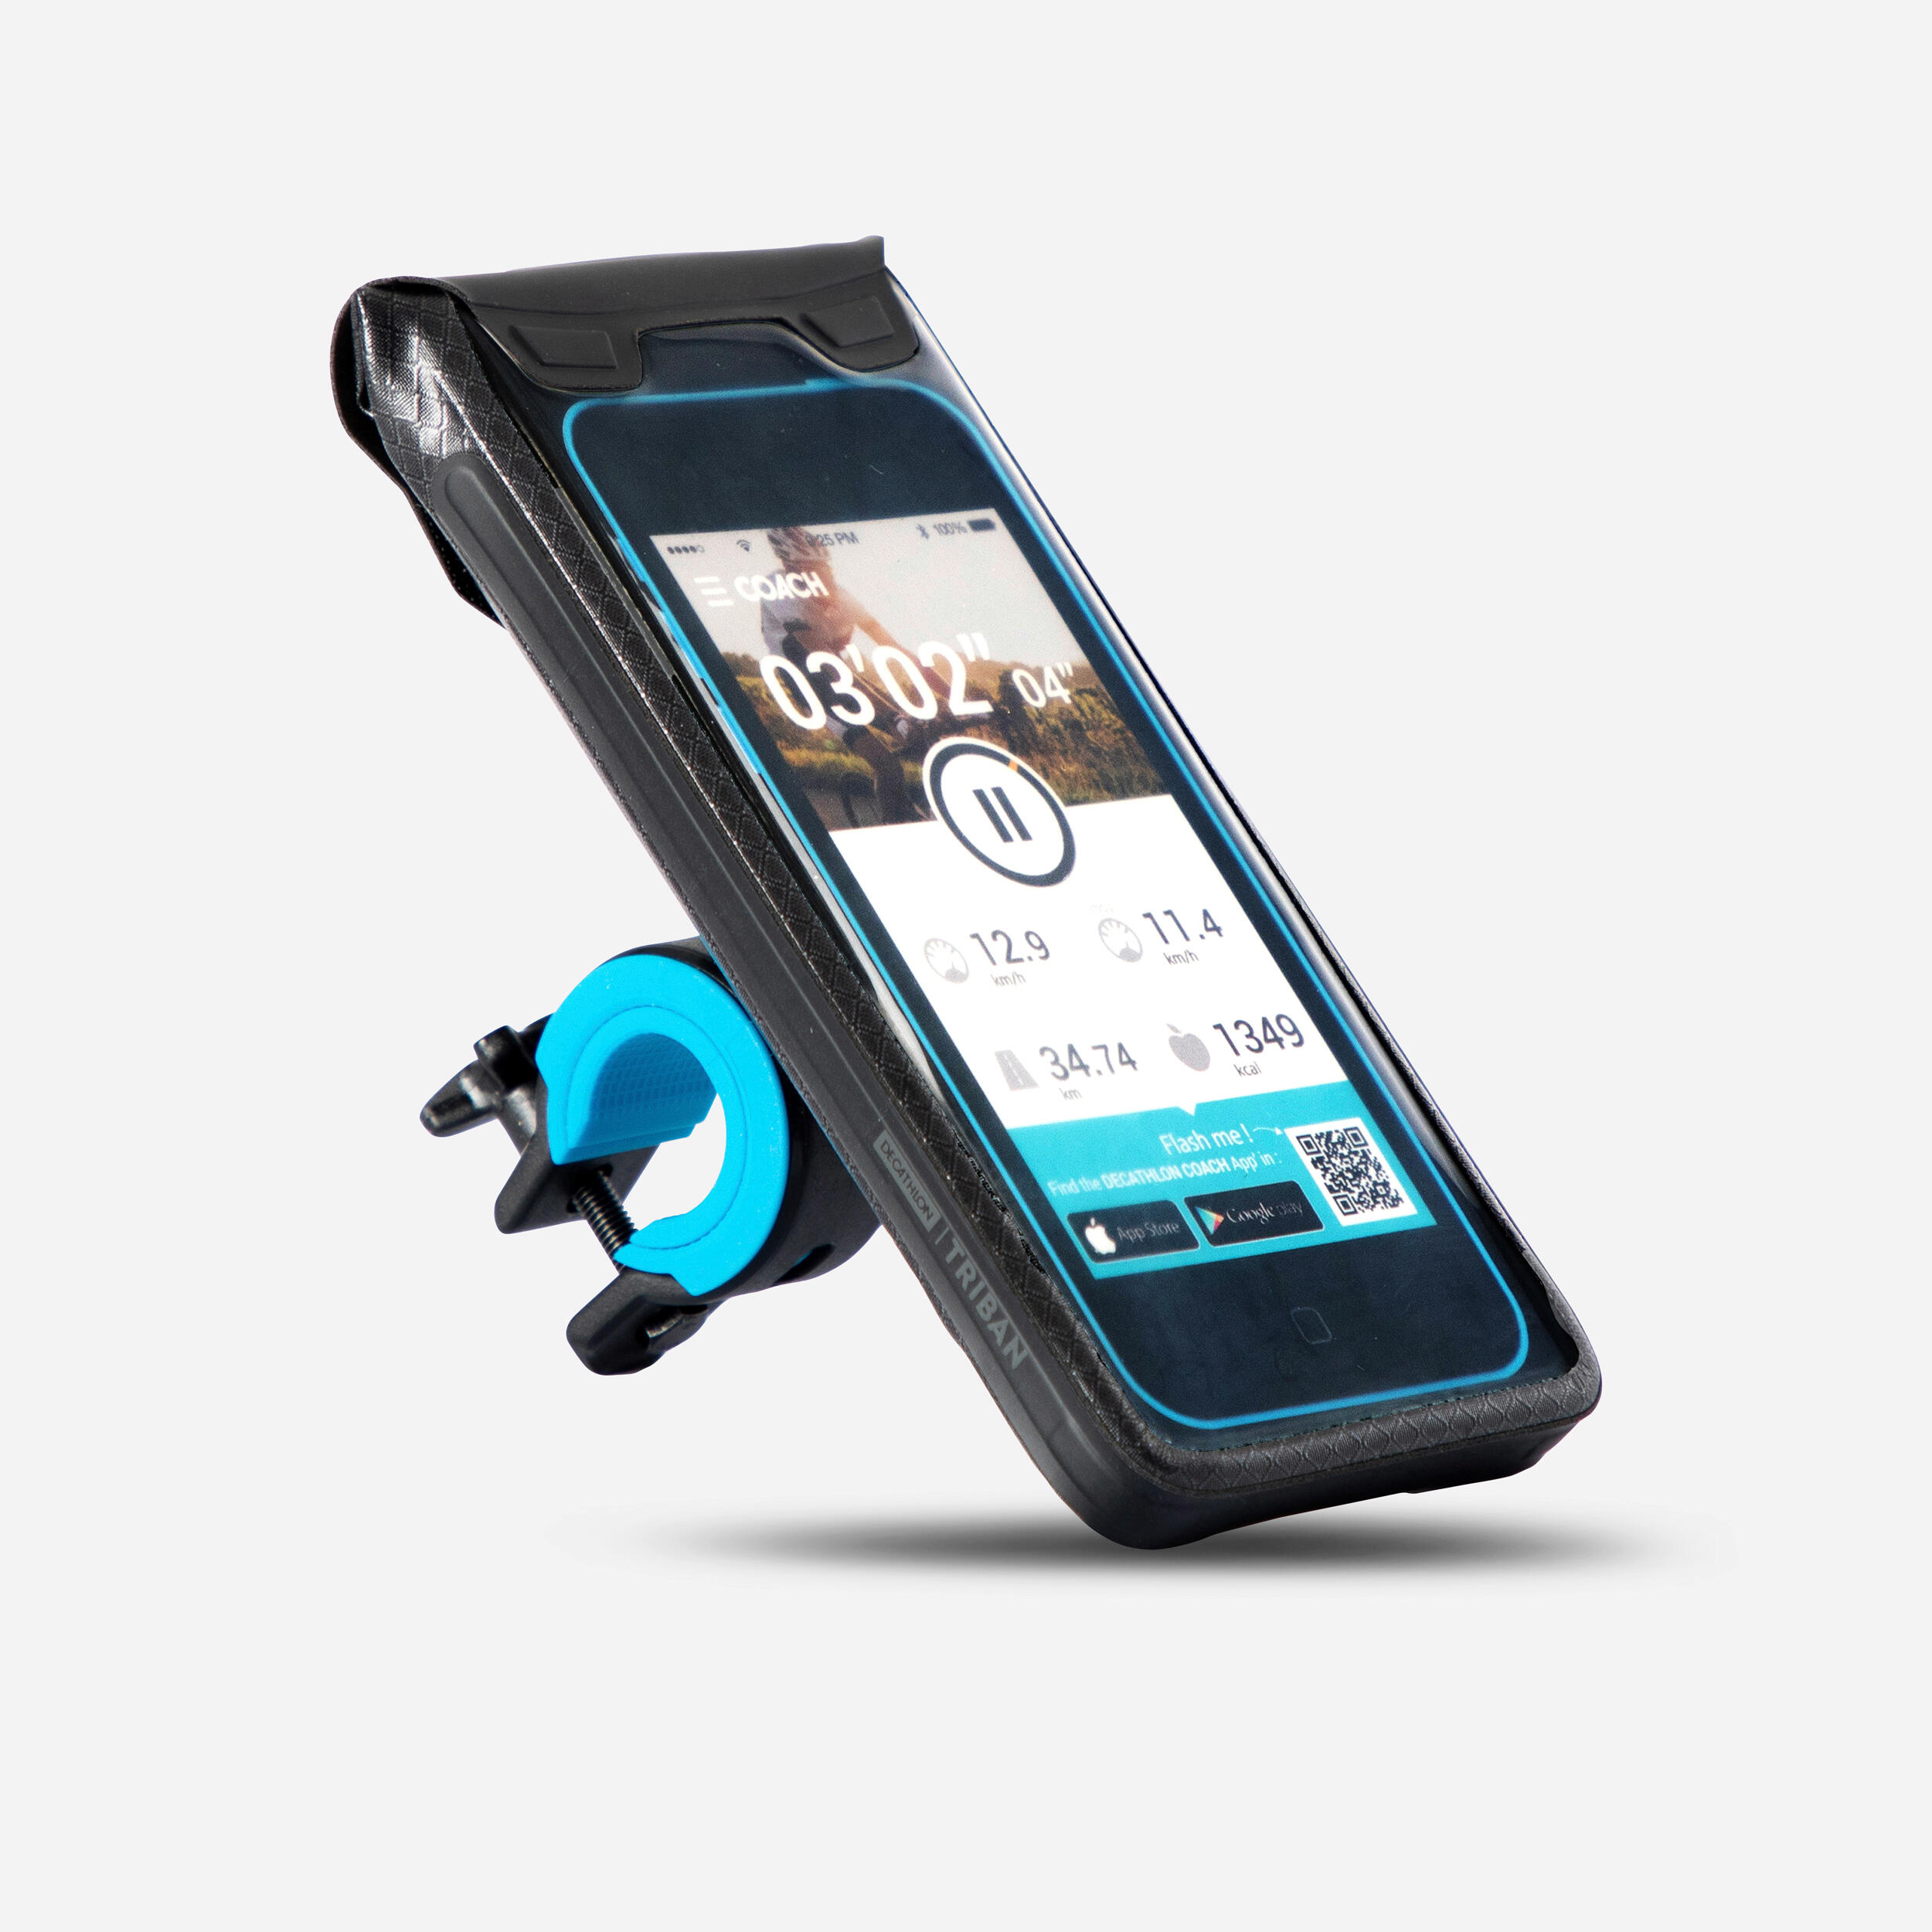 weather resistant bike mount for all smartphone stand